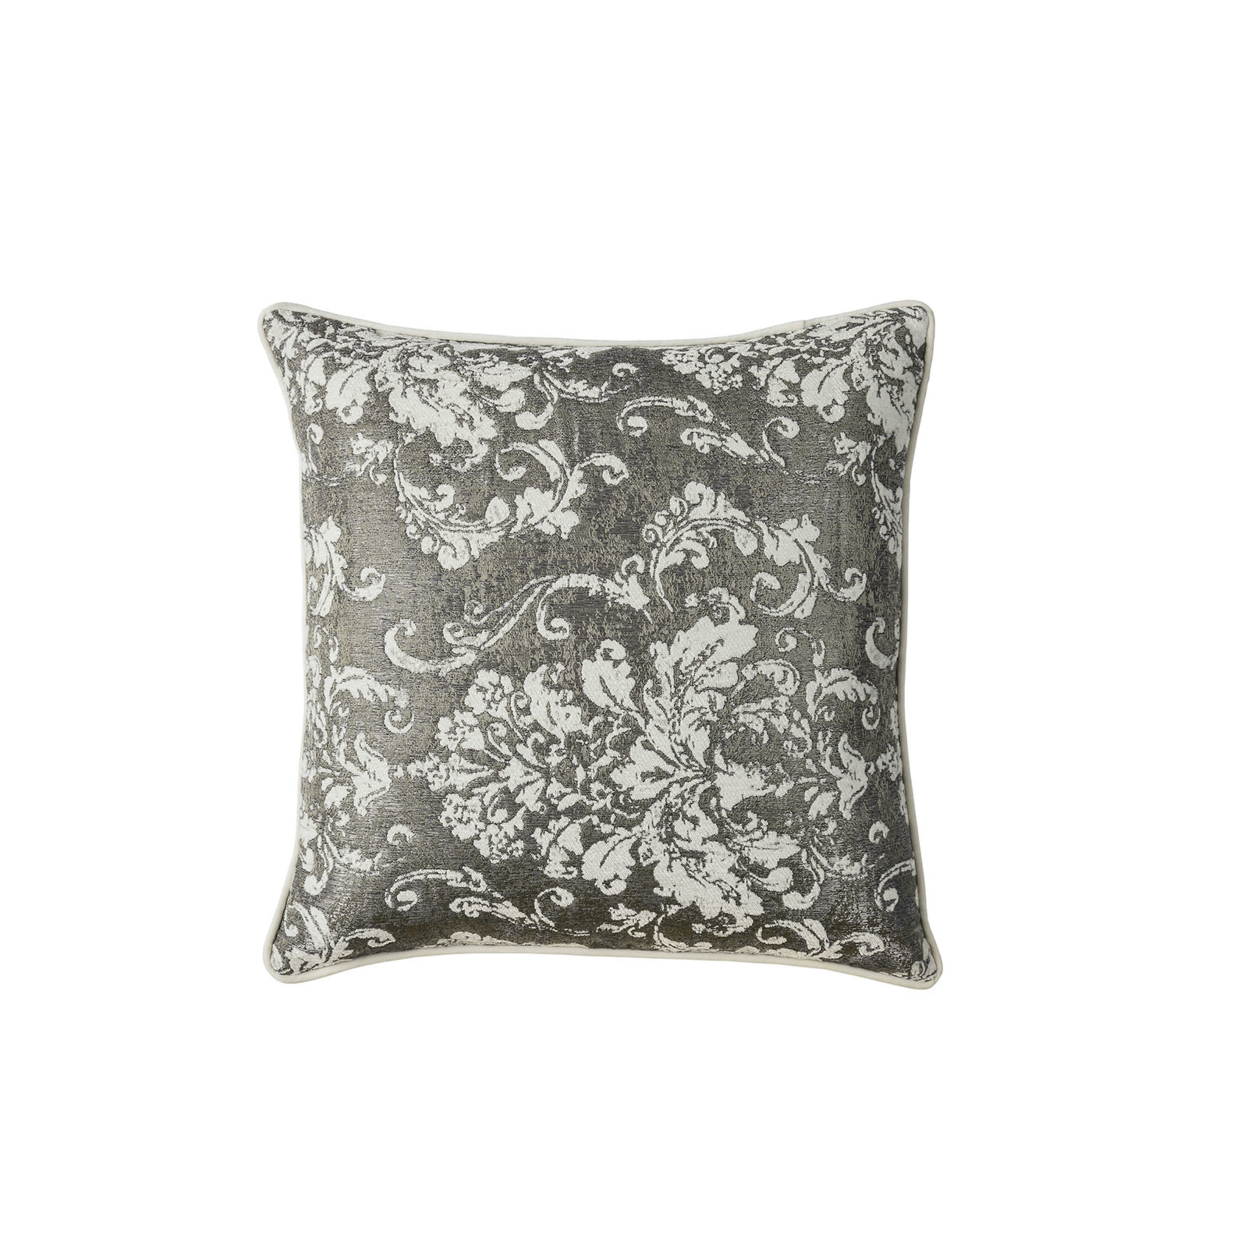 Contemporary Style Set Of 2 Throw Pillows With Floral And Foliage Designs, Silver- Saltoro Sherpi